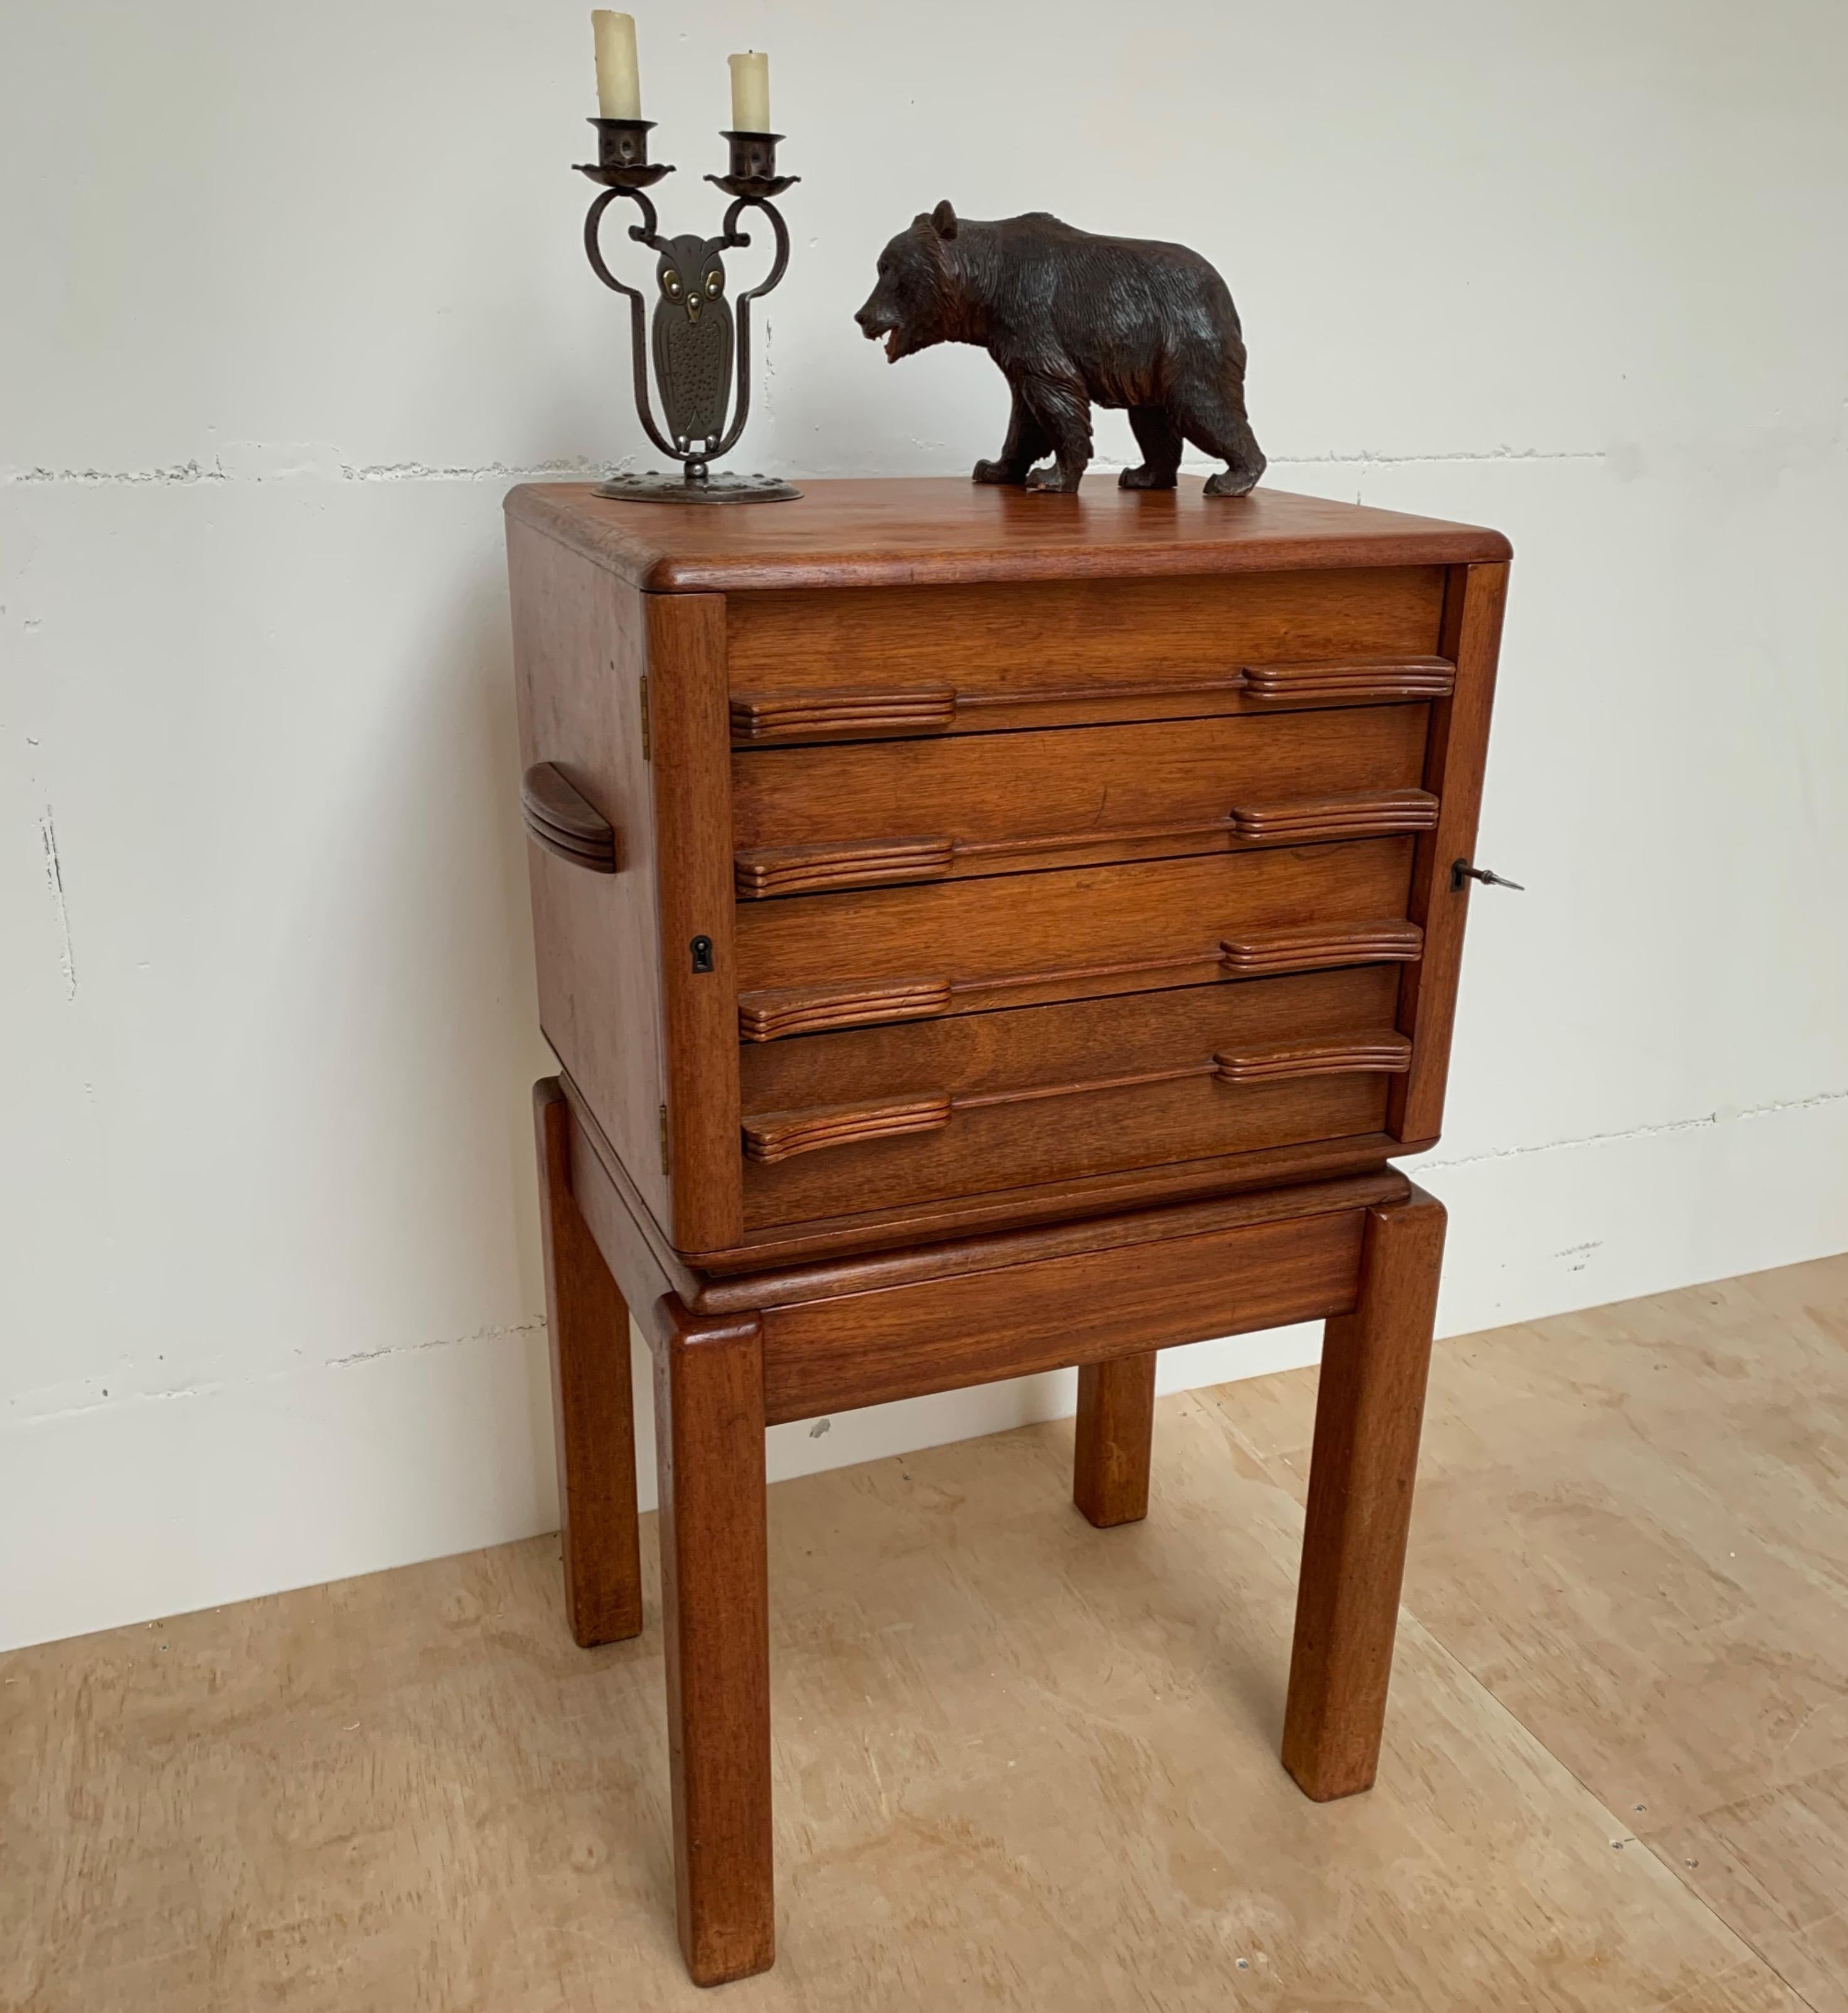 Rare and great design filing cabinet of beautiful teak wood.

This practical and fine quality chest of drawers is very much like a small travelers cabinet. This midcentury and all handcrafted piece consists of a stand and a portable top-cabinet